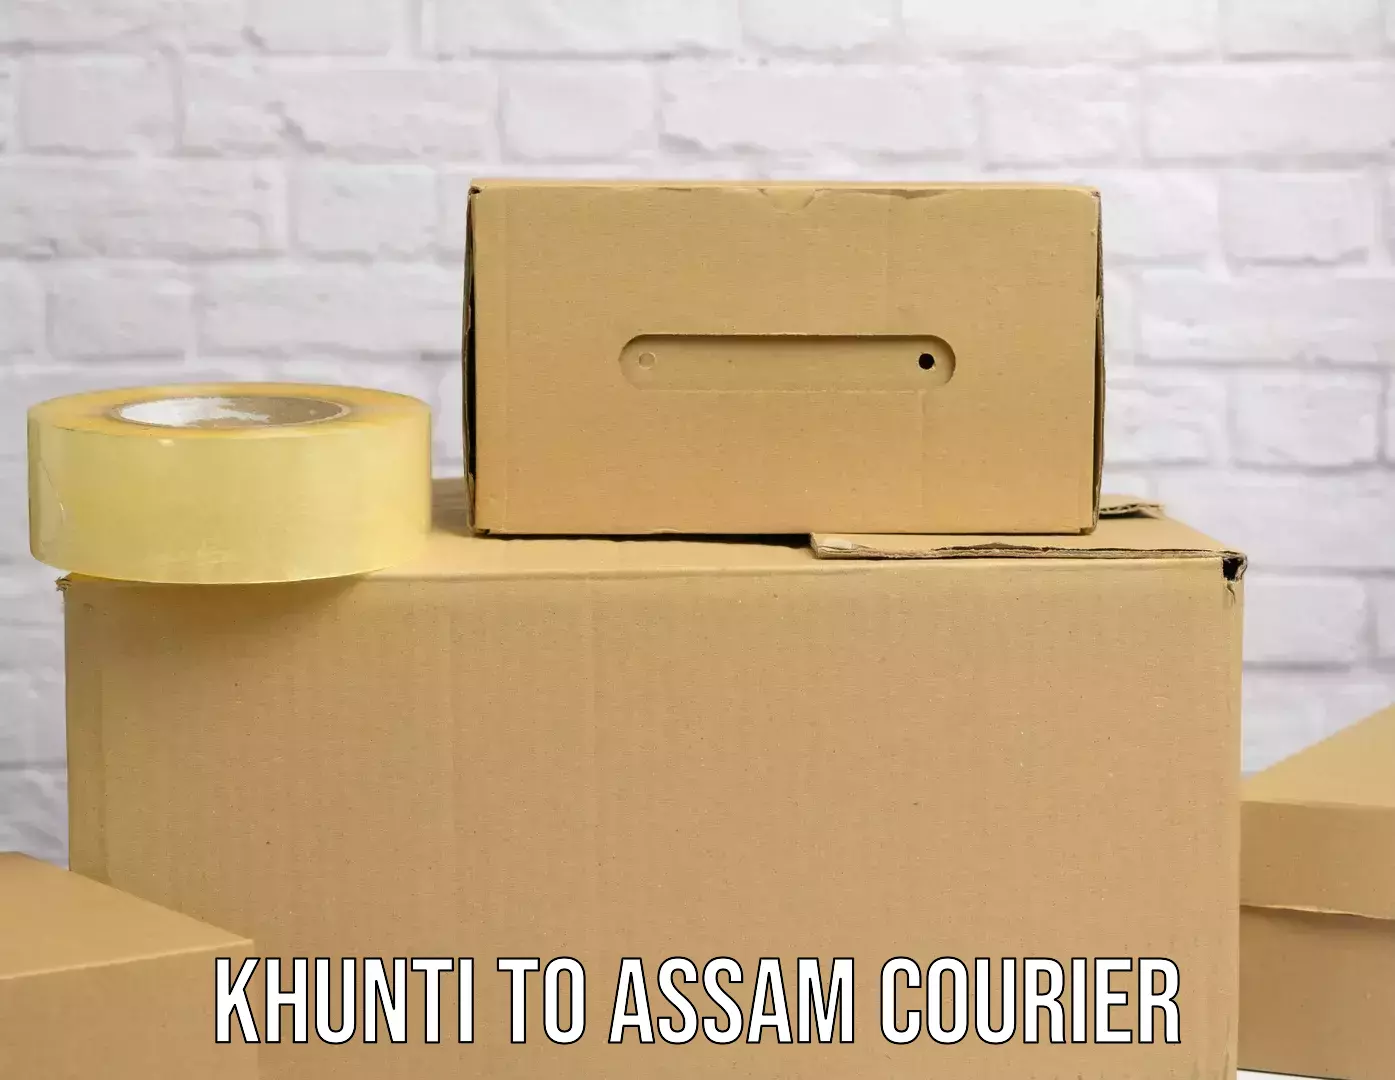 Cash on delivery service Khunti to Assam